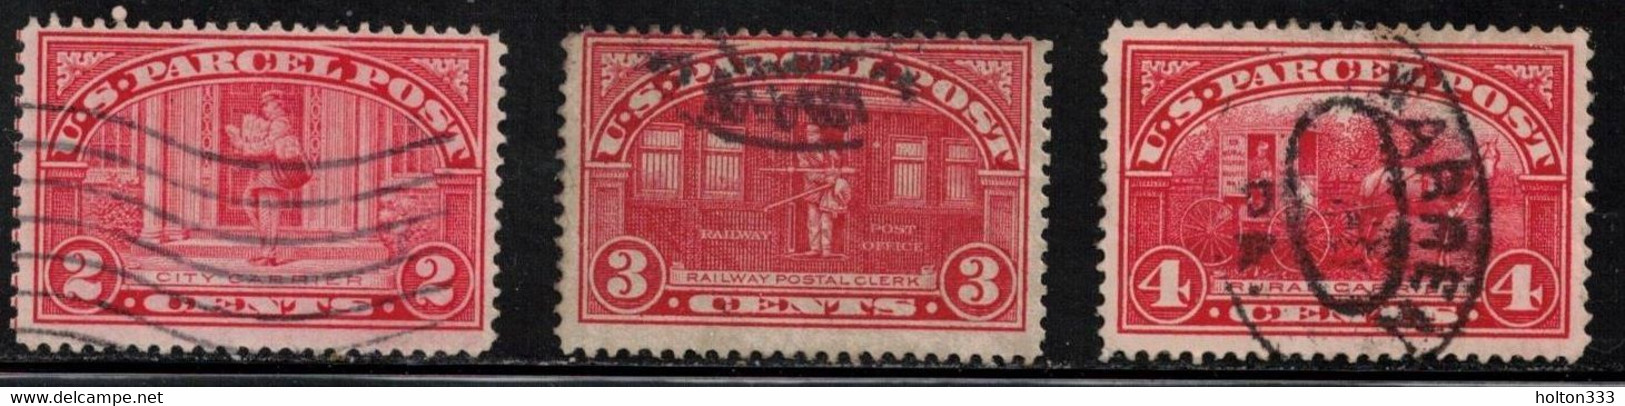 UNITED STATES Scott # Q2-4 Used - Parcel Post Issues - Parcel Post & Special Handling